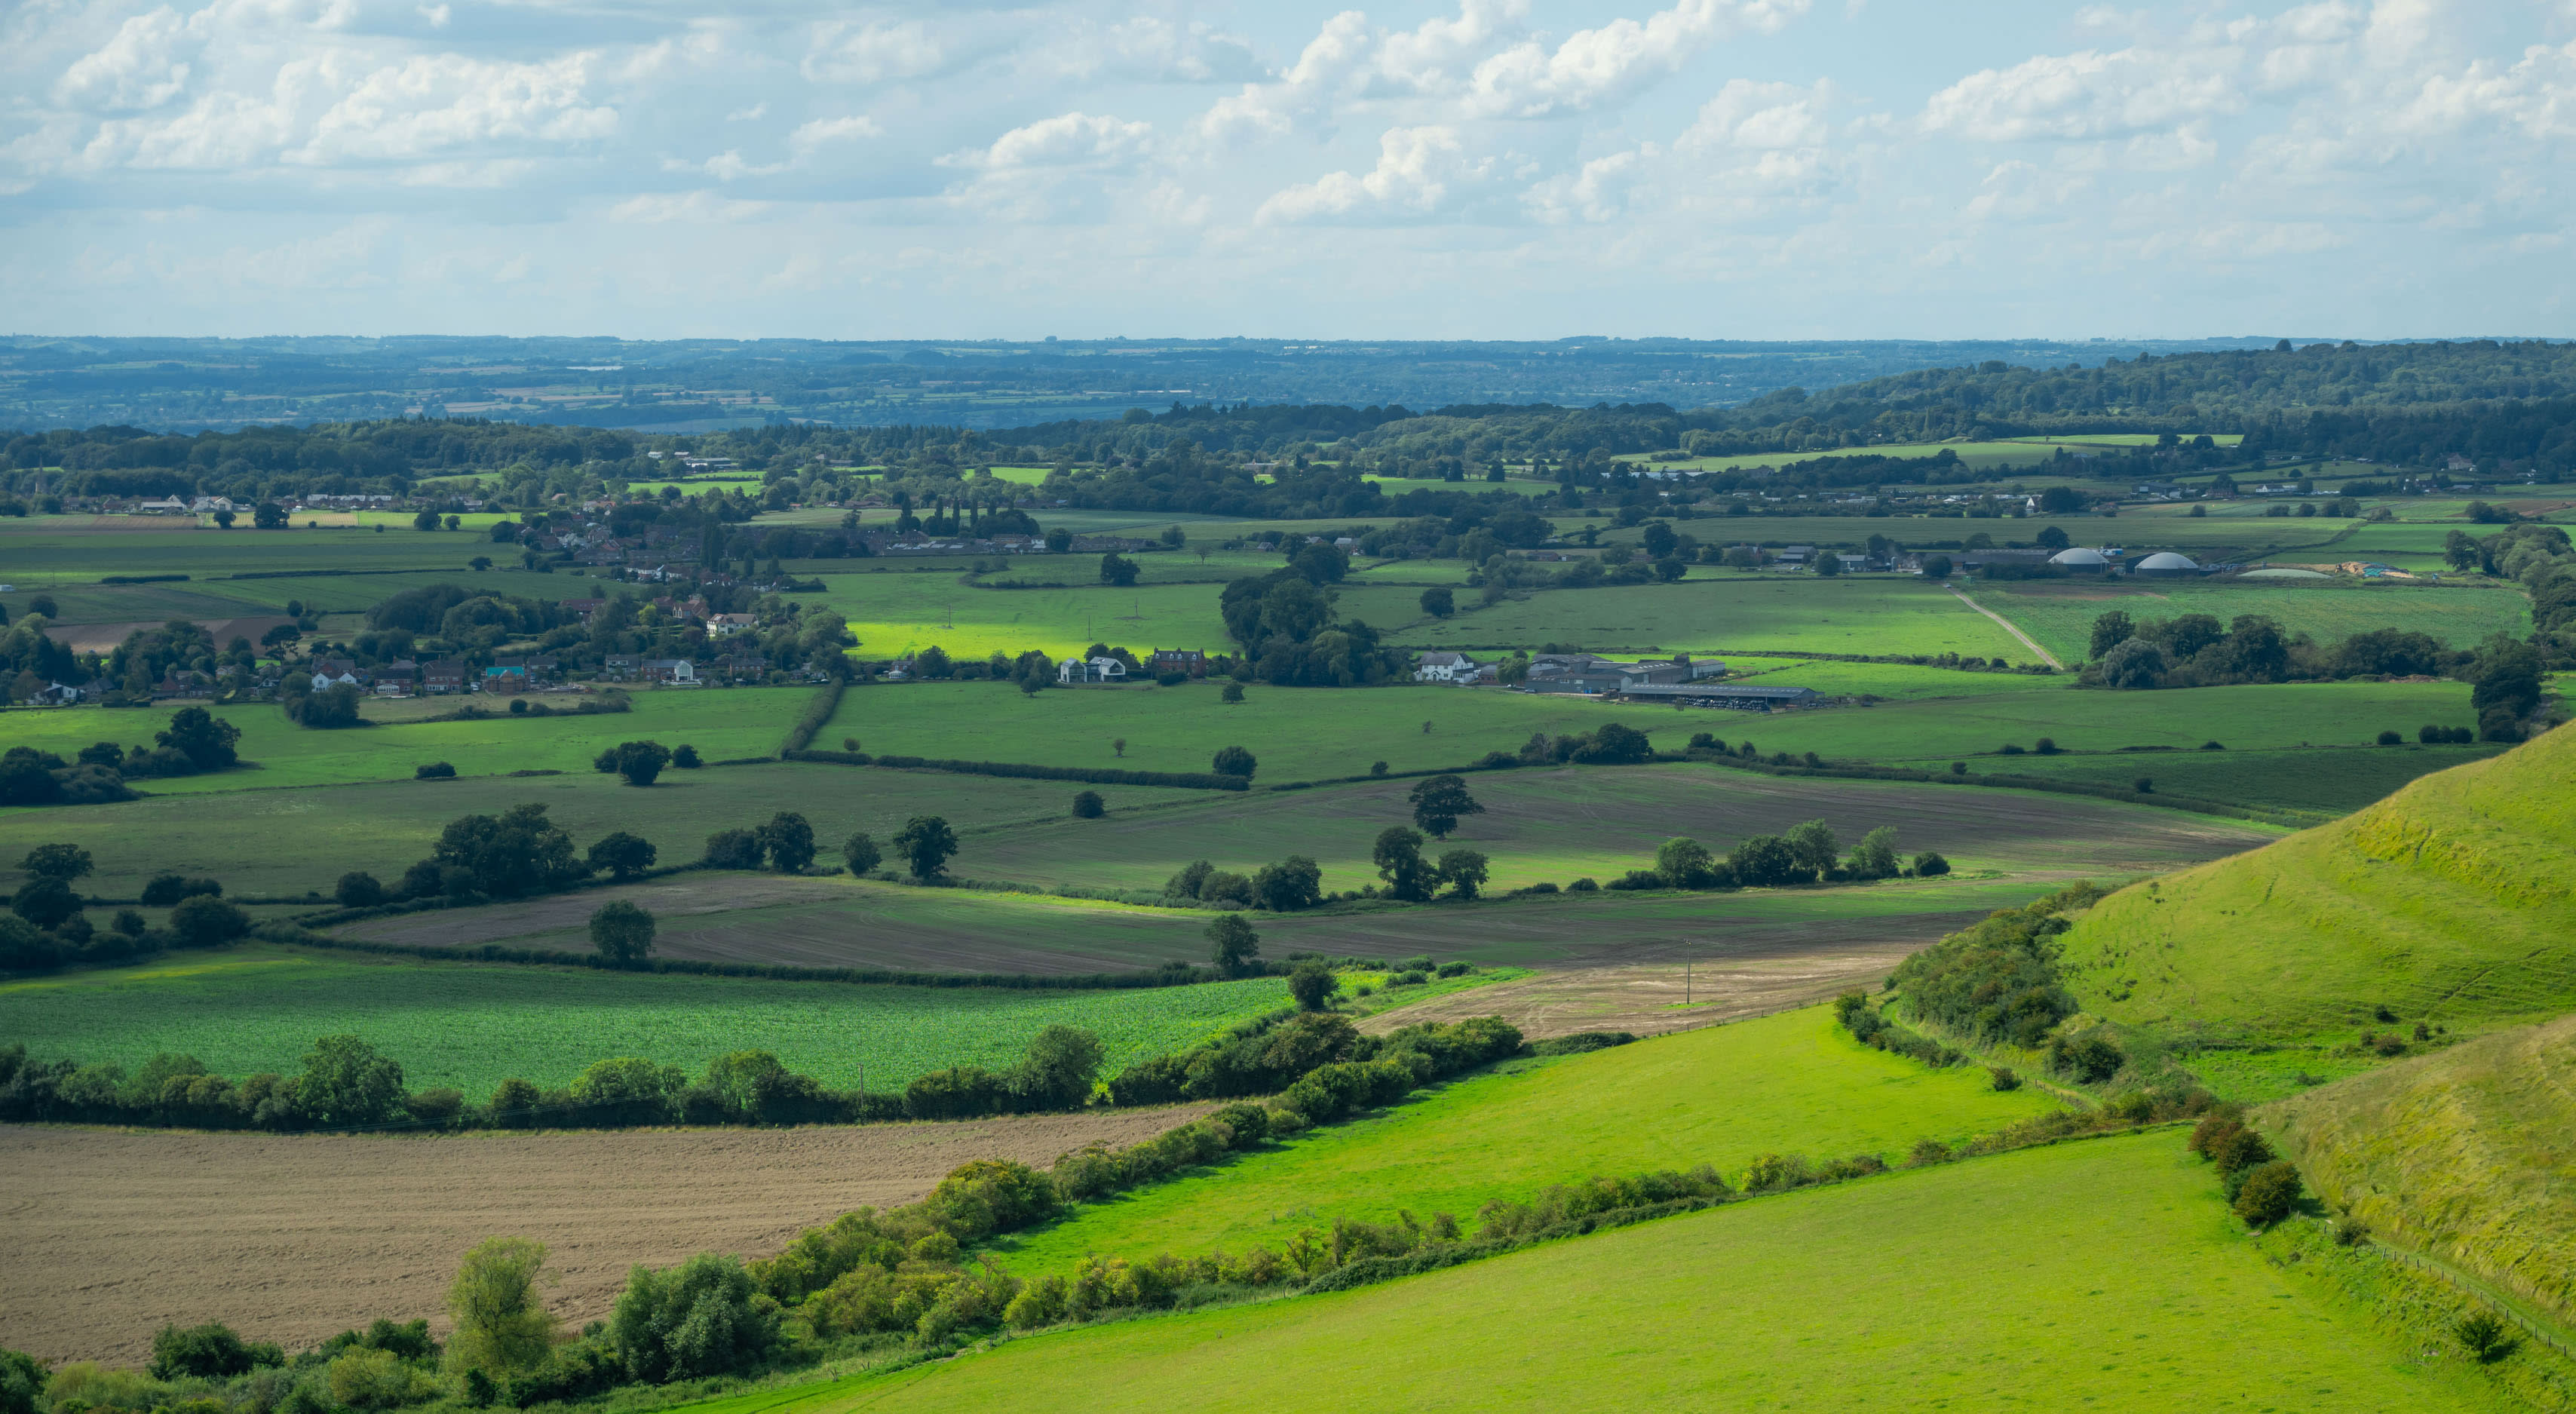 View of landscape including fields and hedgerows